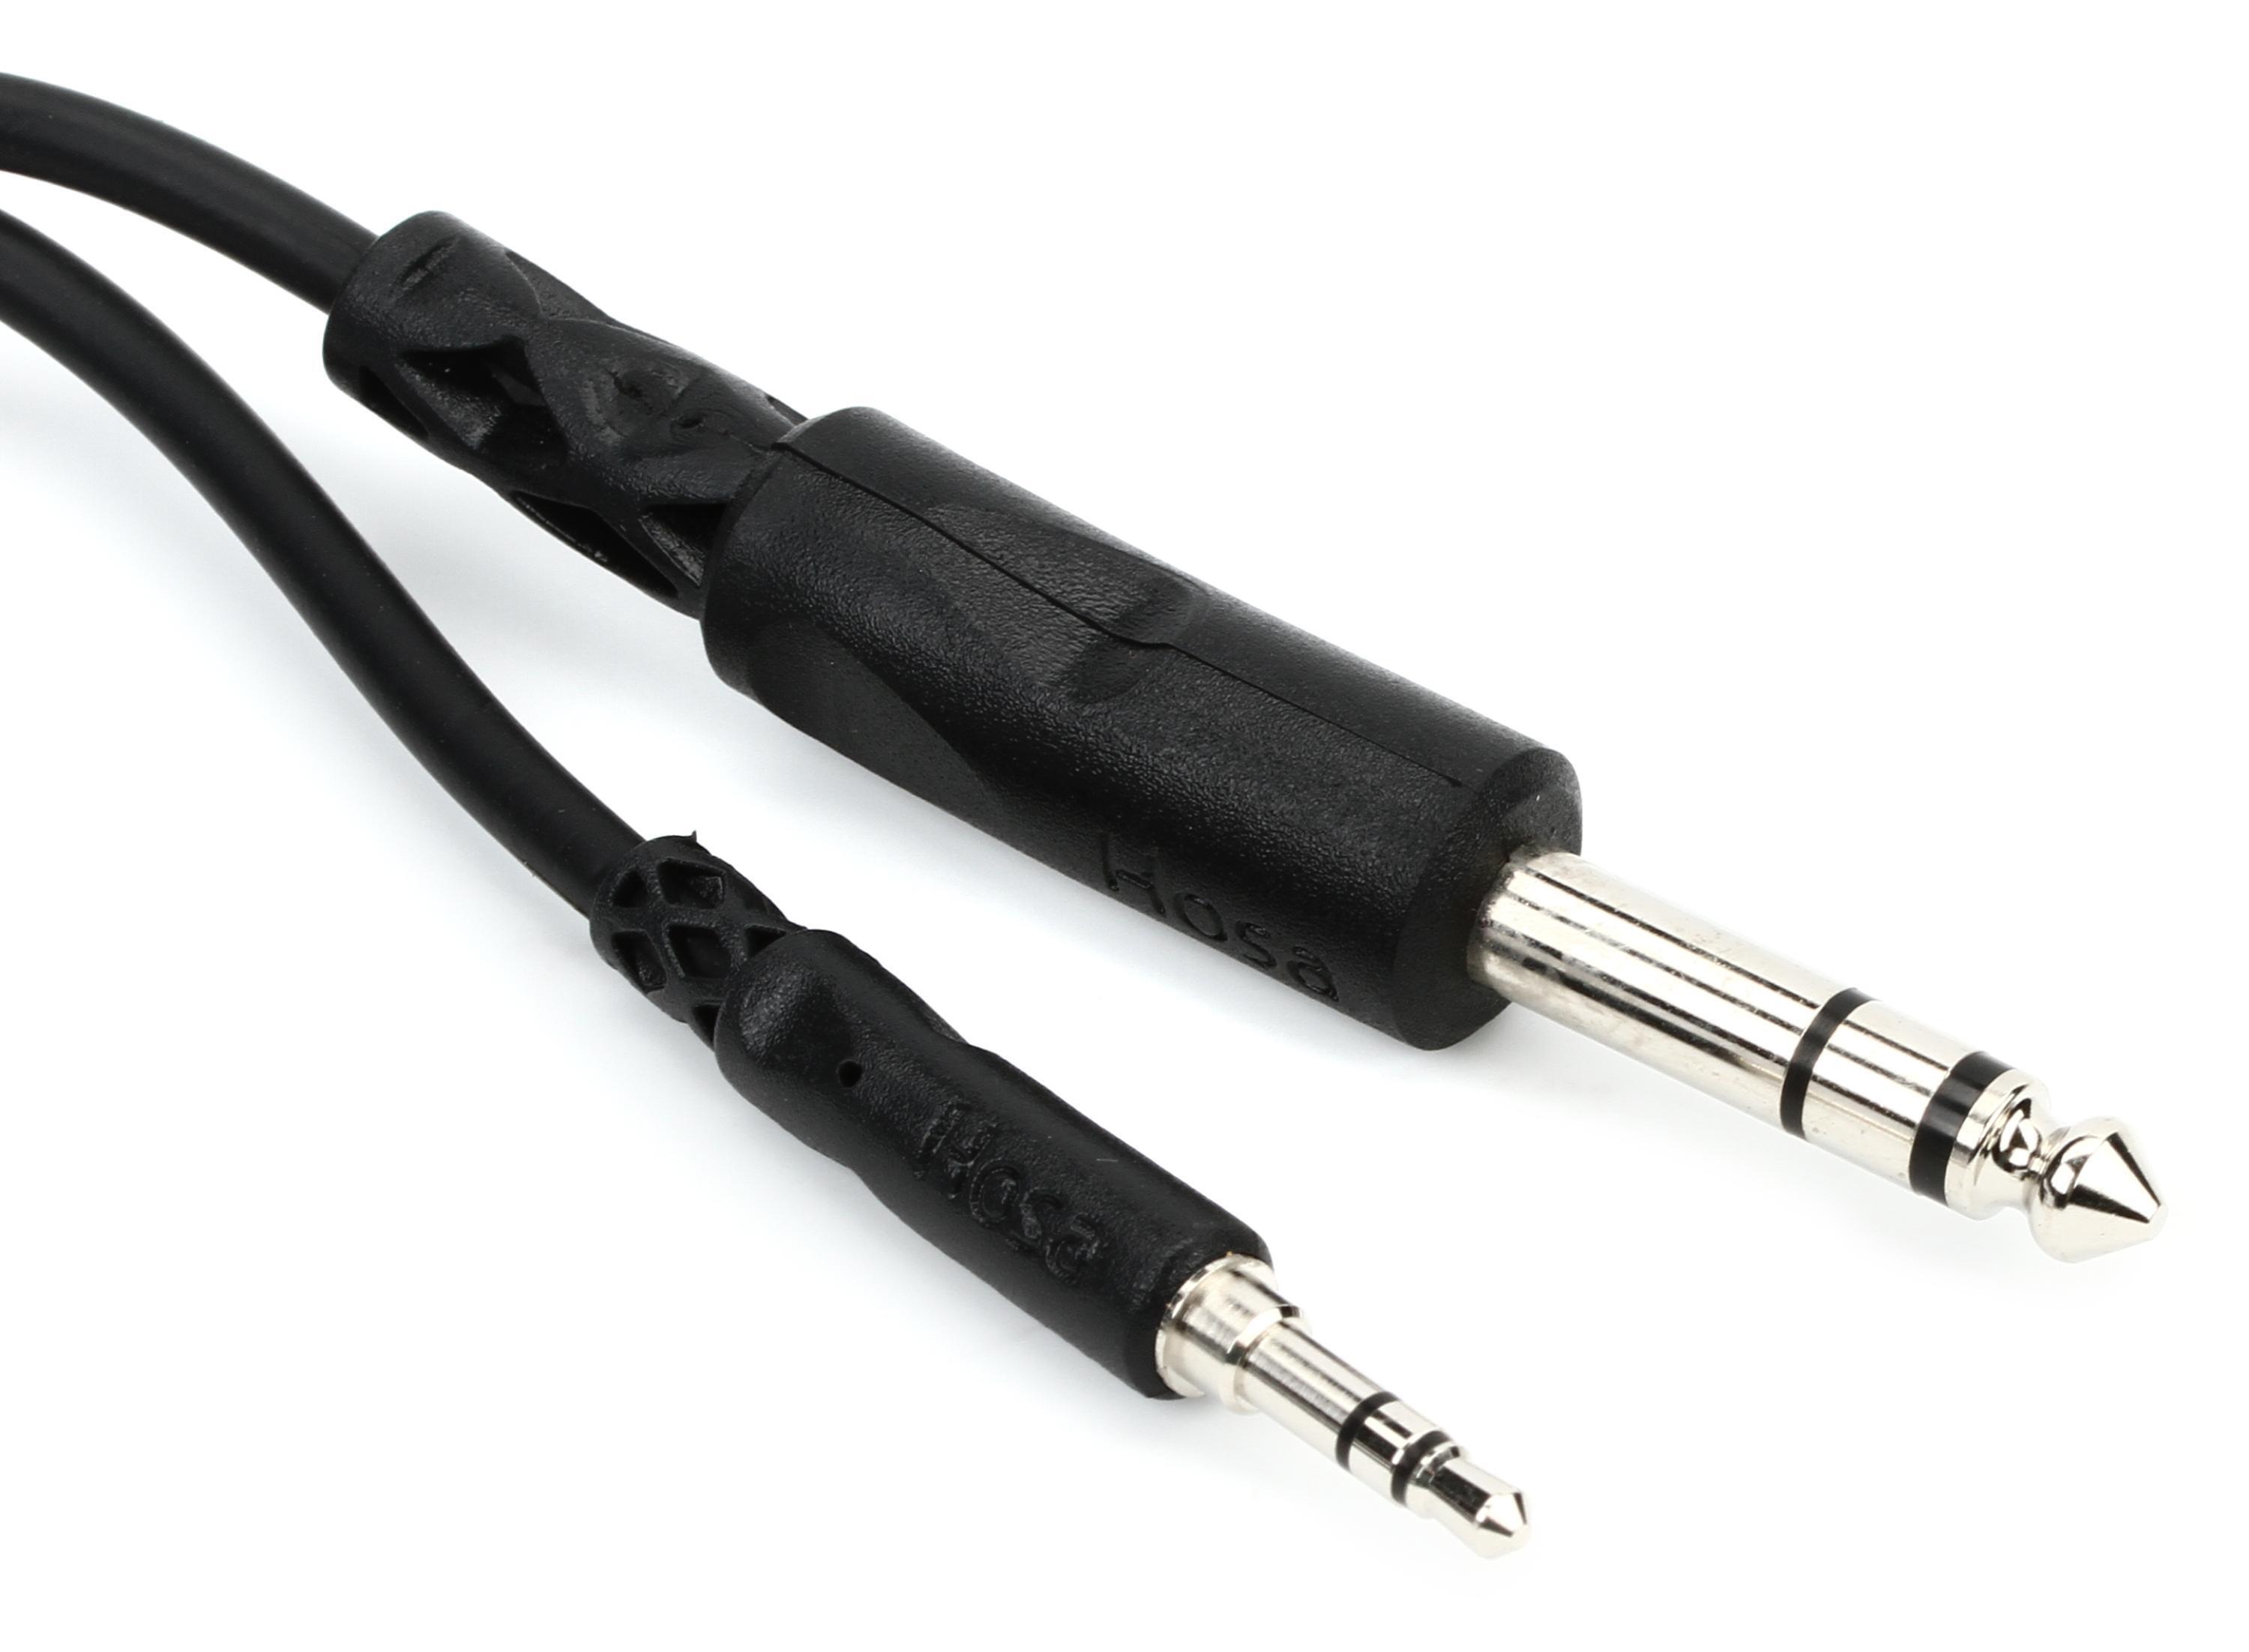 Bundled Item: Hosa CMS-110 Stereo Interconnect Cable - 3.5mm TRS Male to 1/4-inch TRS Male - 10 foot